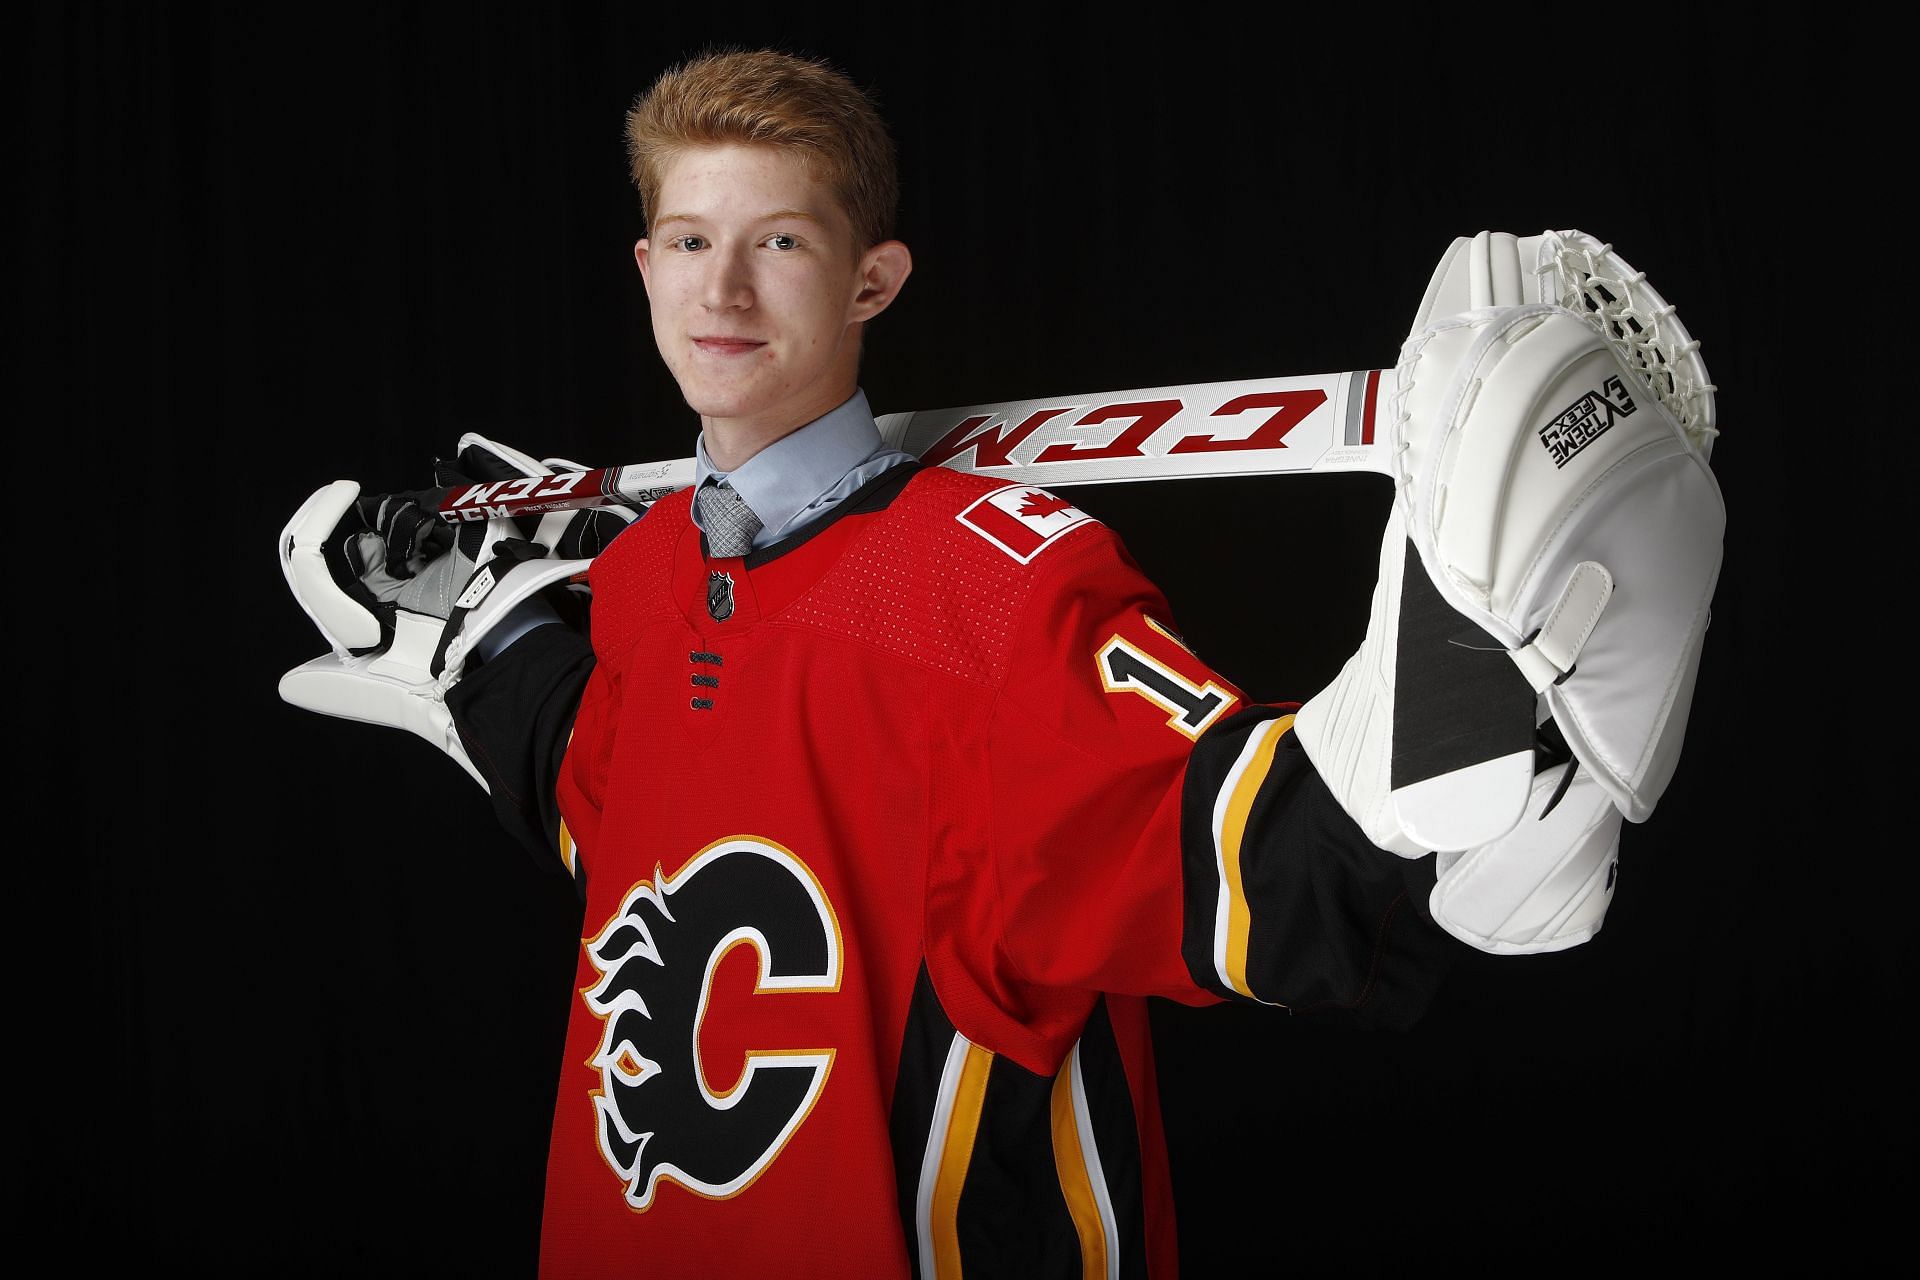 Dustin Wolf poses after being selected 214th overall by the Calgary Flames during the 2019 NHL Draft at Rogers Arena on June 22, 2019 in Vancouver, Canada. (Photo by Kevin Light/Getty Images)